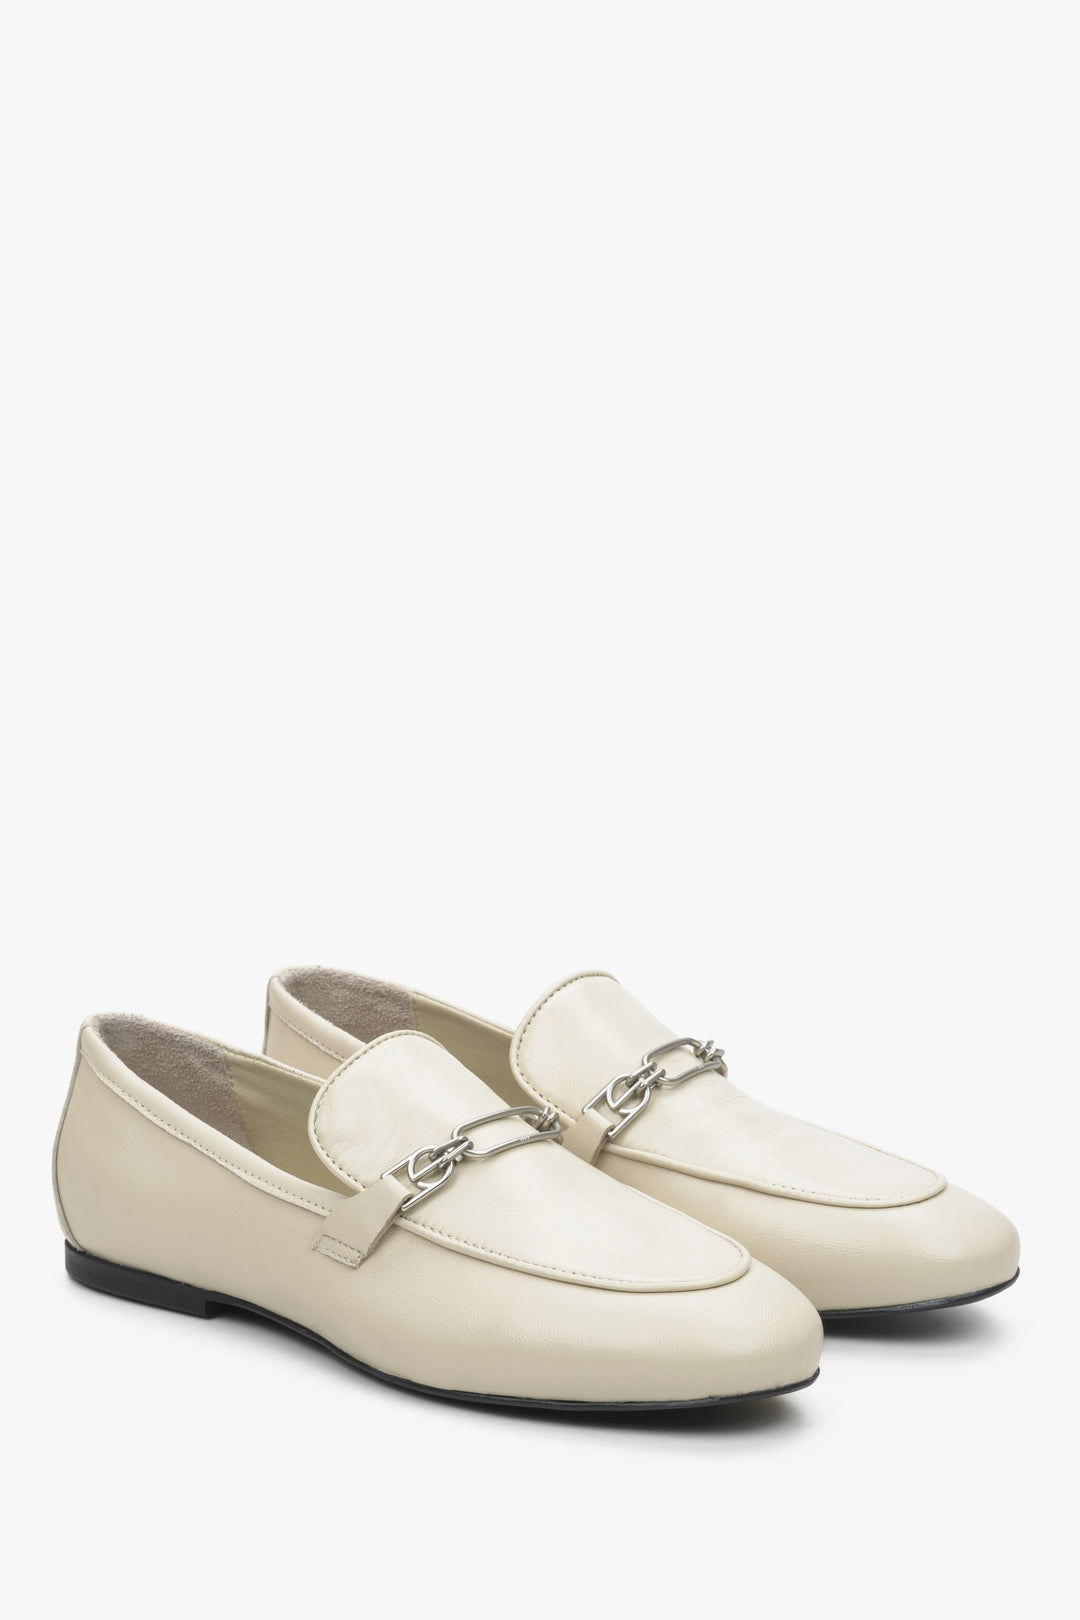 Women's Light Beige Leather Penny Loafers with a Silver Chain Estro ER00114386